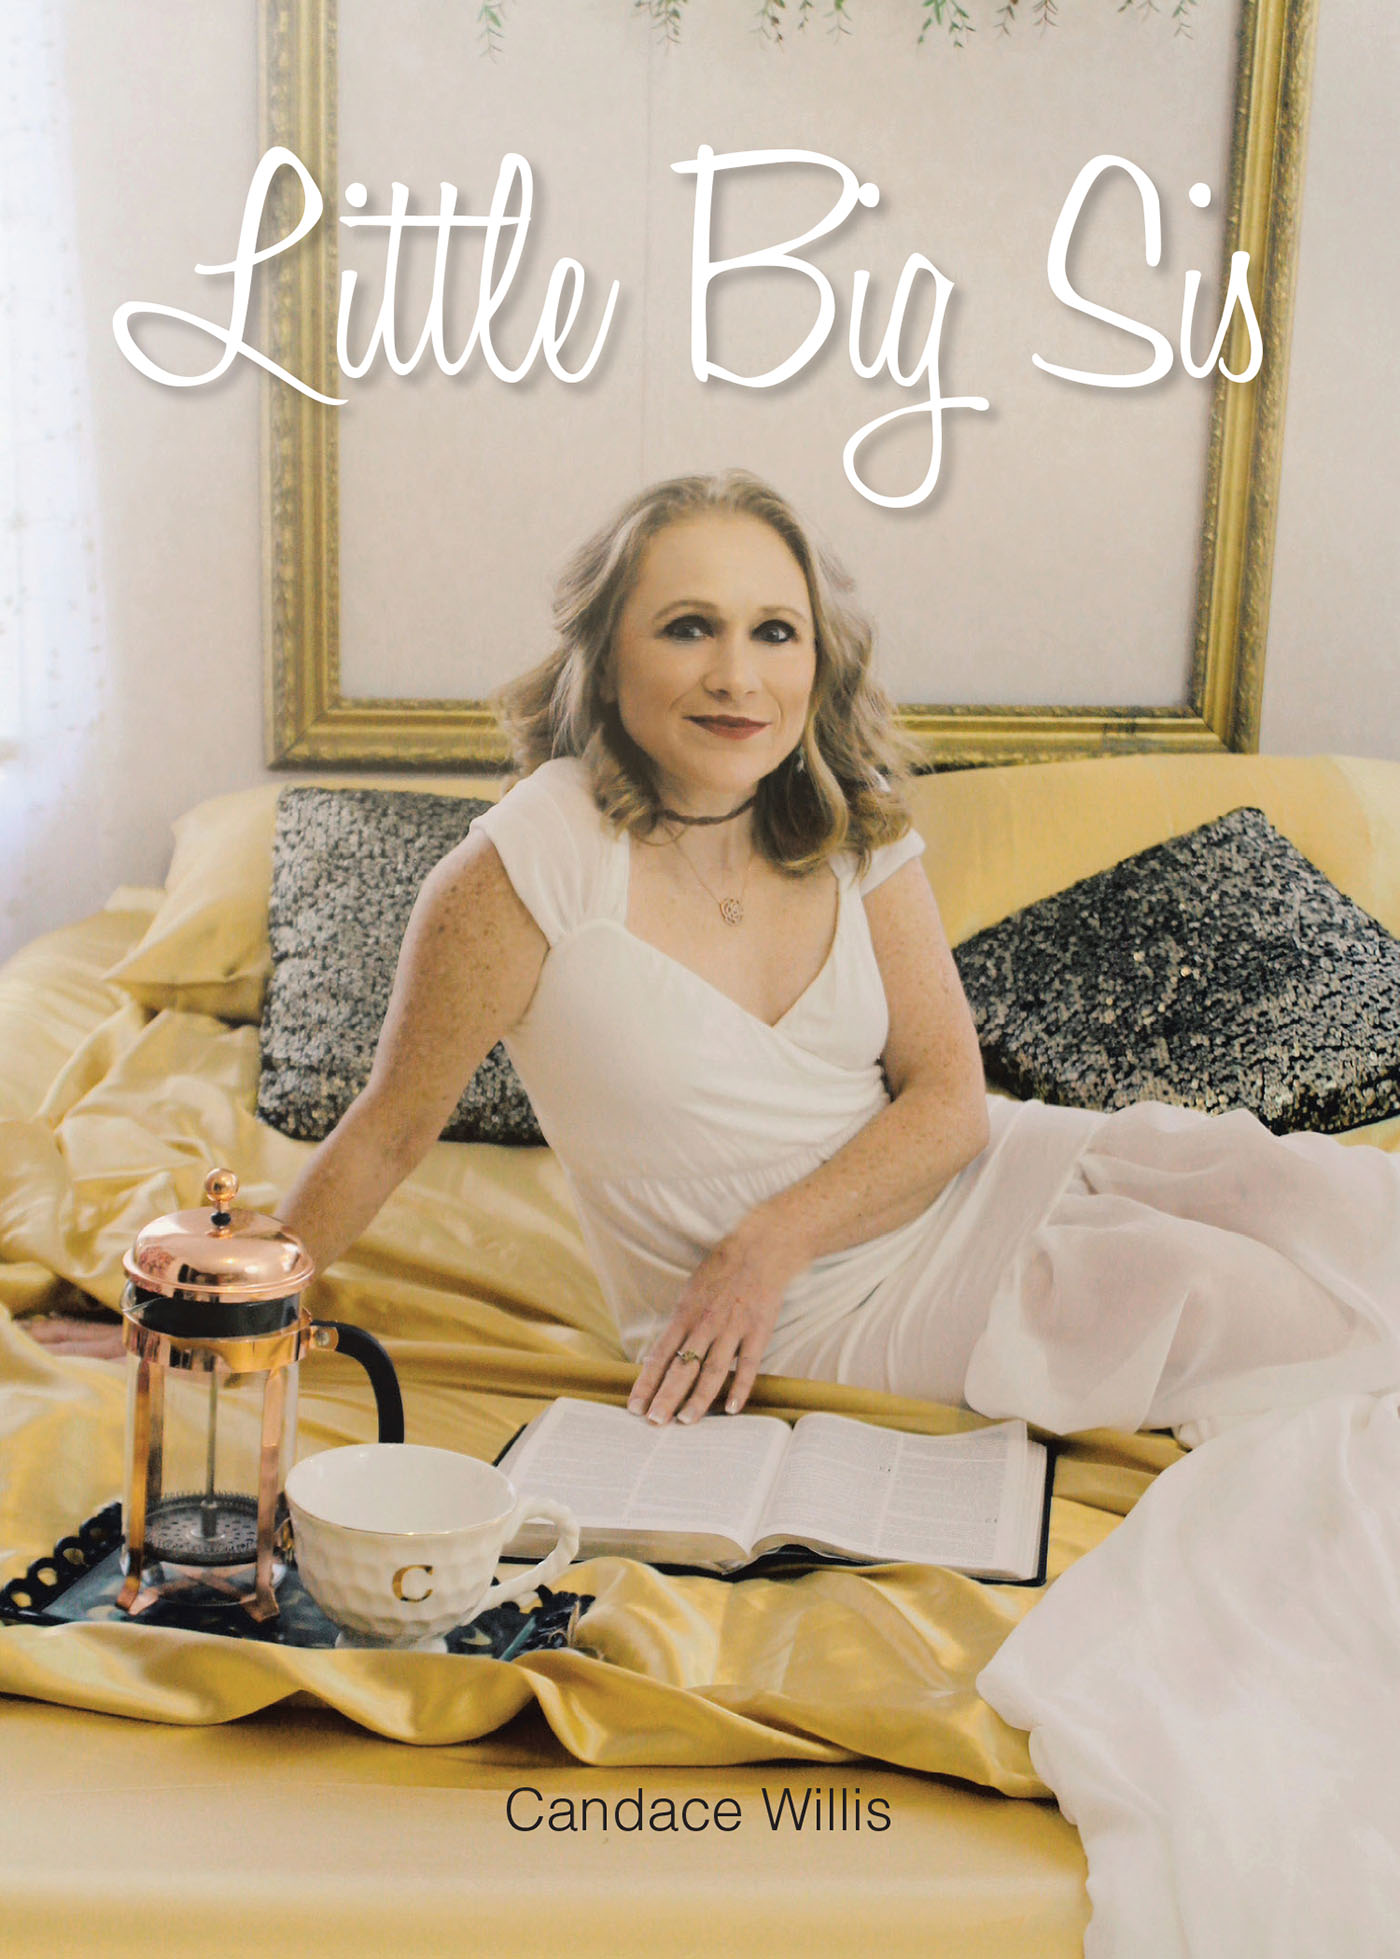 Candace Willis’s Newly Released "Little Big Sis" is an Informative and Deeply Personal Account of Life with Turner Syndrome